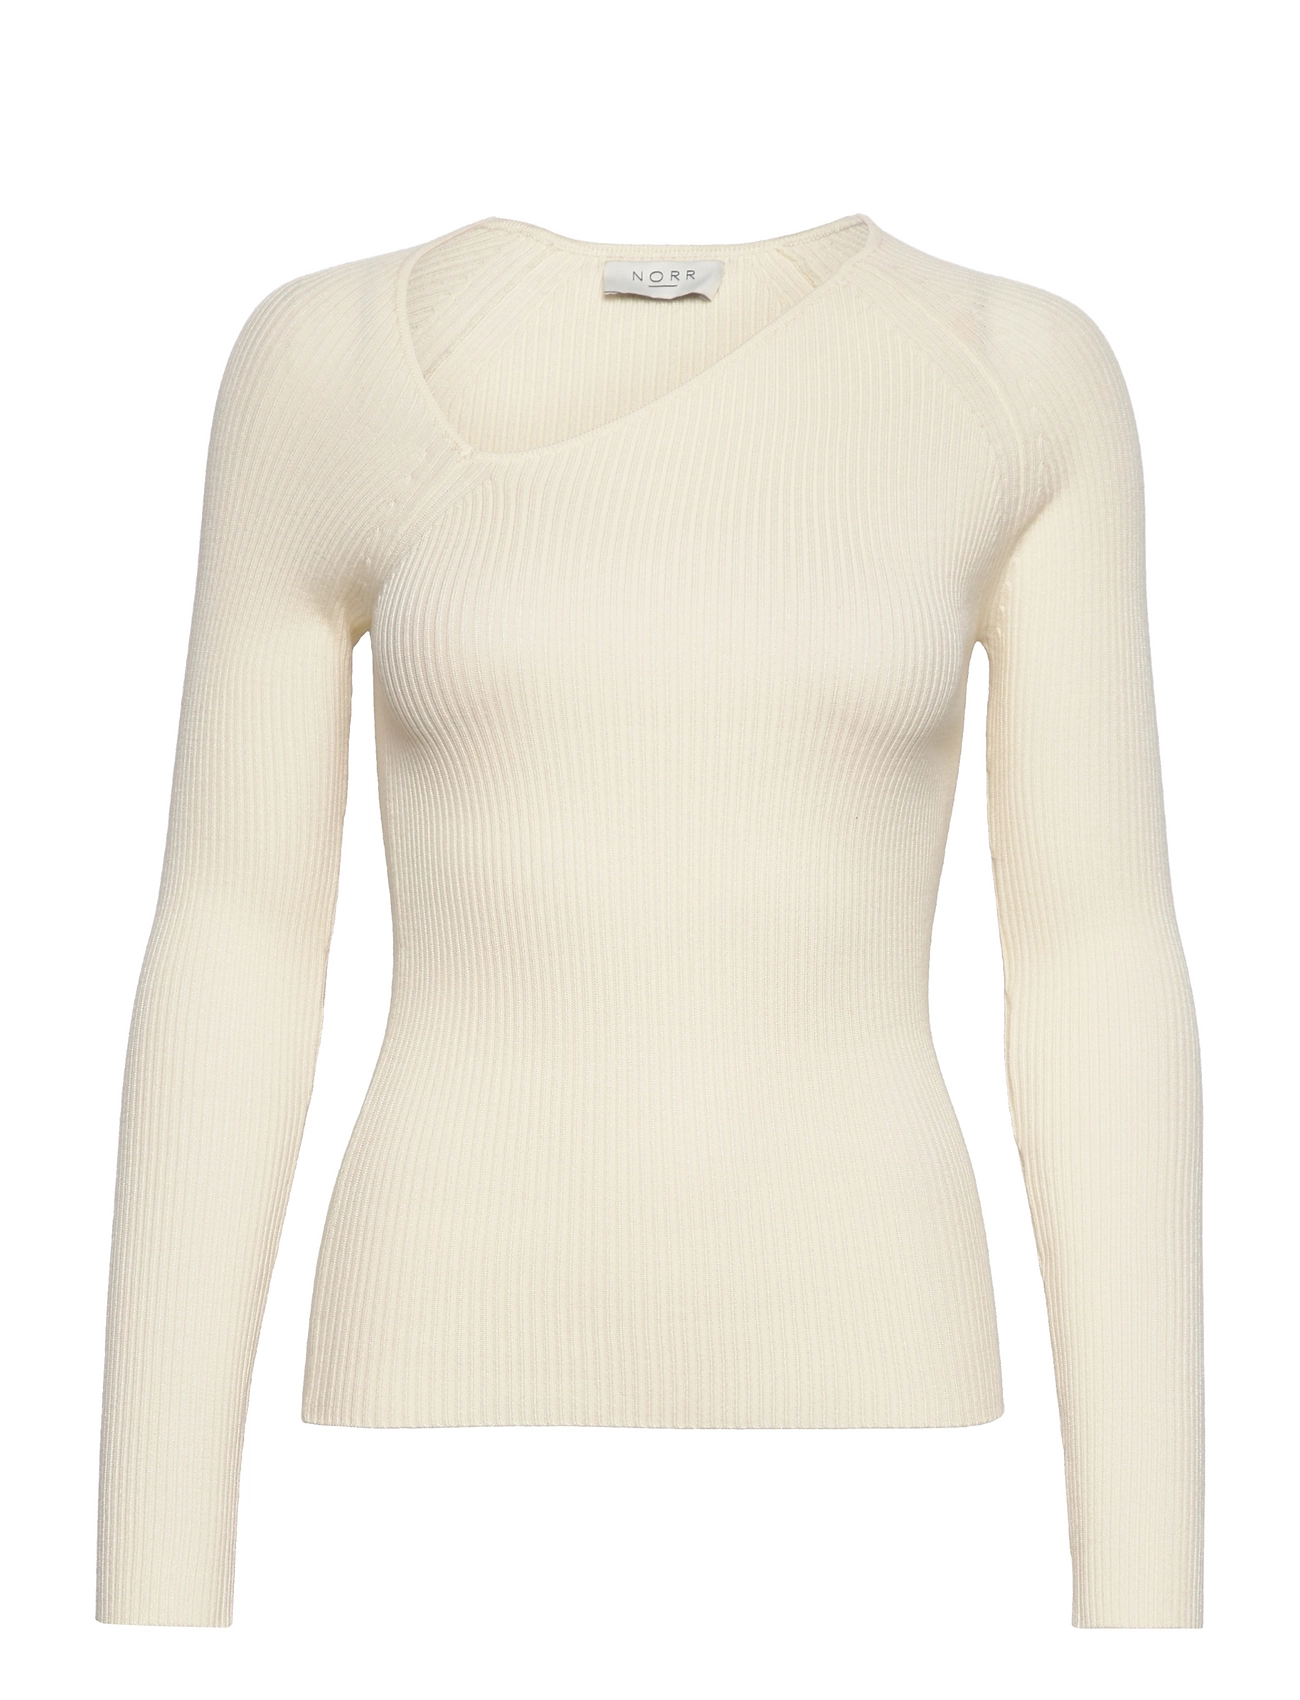 Sherry Knit Top Tops T-shirts & Tops Long-sleeved Cream NORR